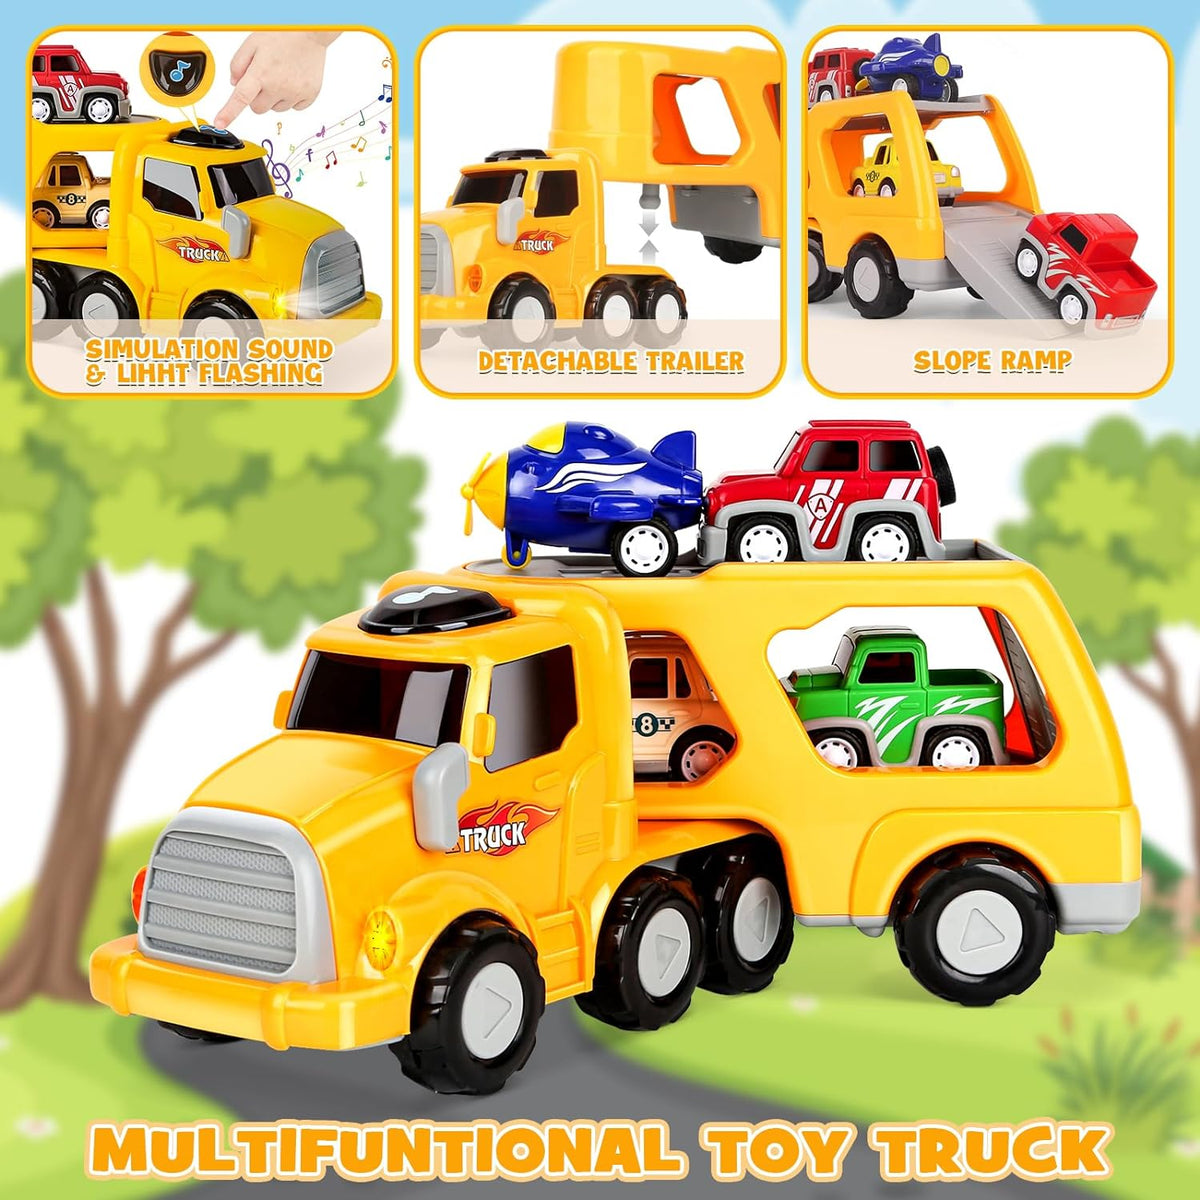 Dreamon 5-in-1 Transport Vehicles Toys for Ages 2-4 with Light & Sound, Ideal Construction Car Toy